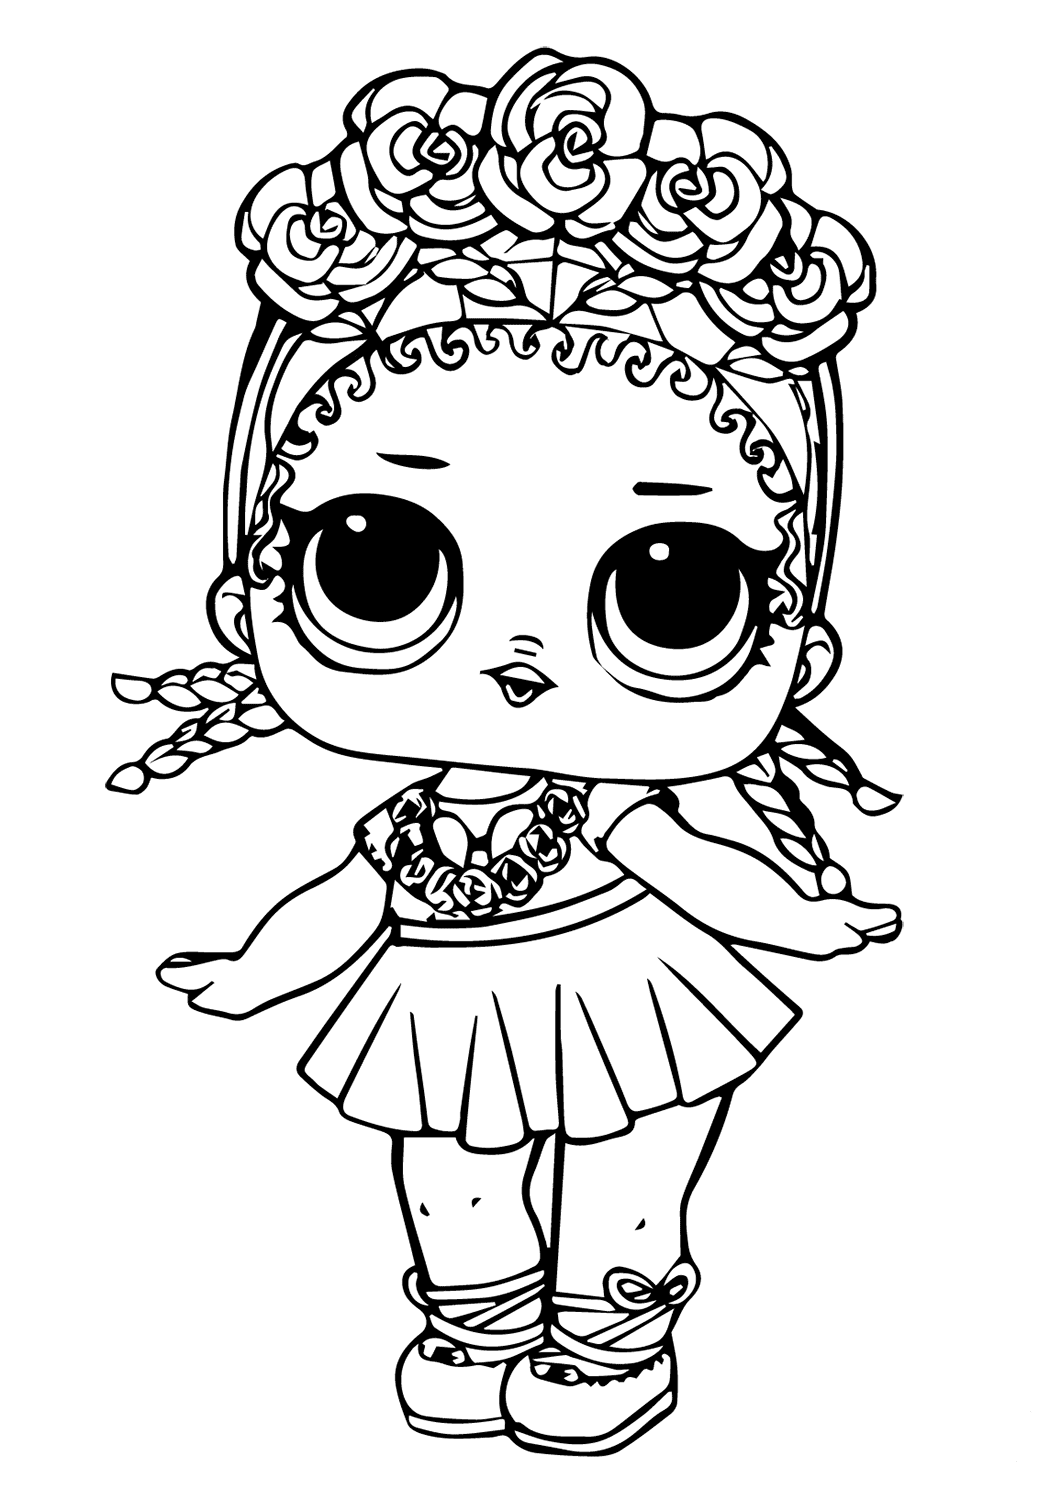 LOL Coloring Pages FREE Printable 97